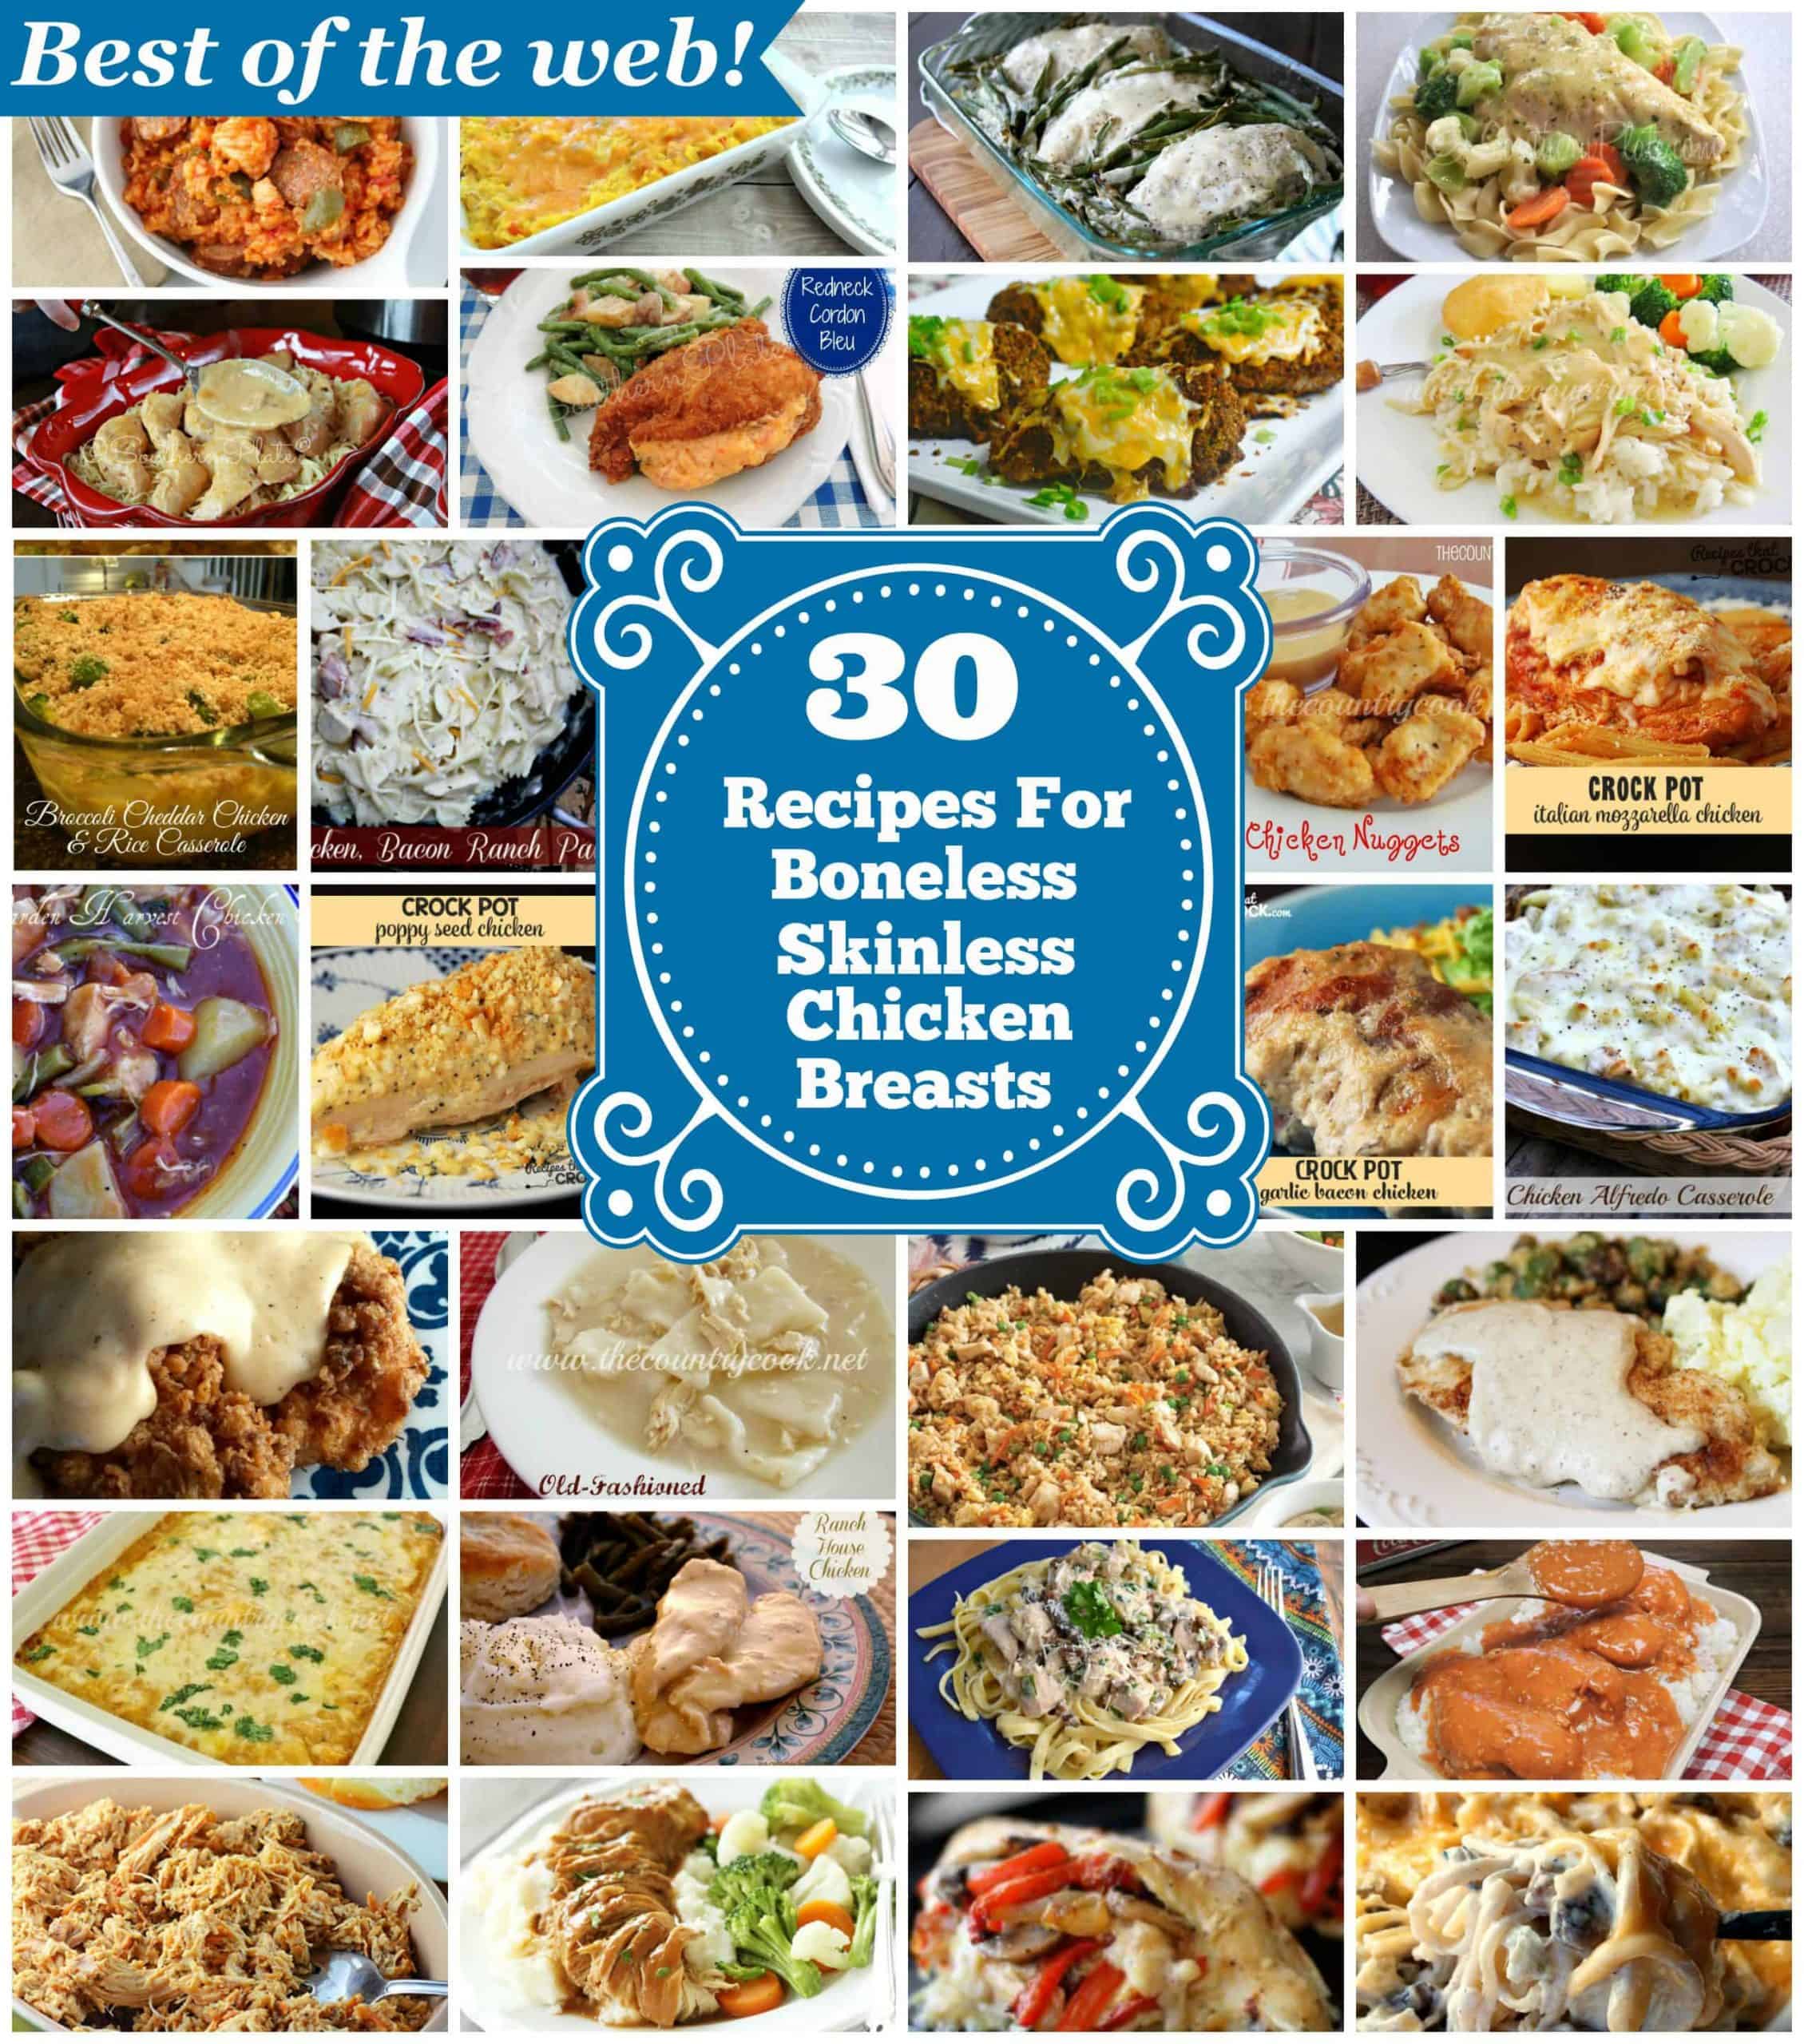 30 Recipes for Boneless Skinless Chicken Breasts *BEST OF THE WEB!*